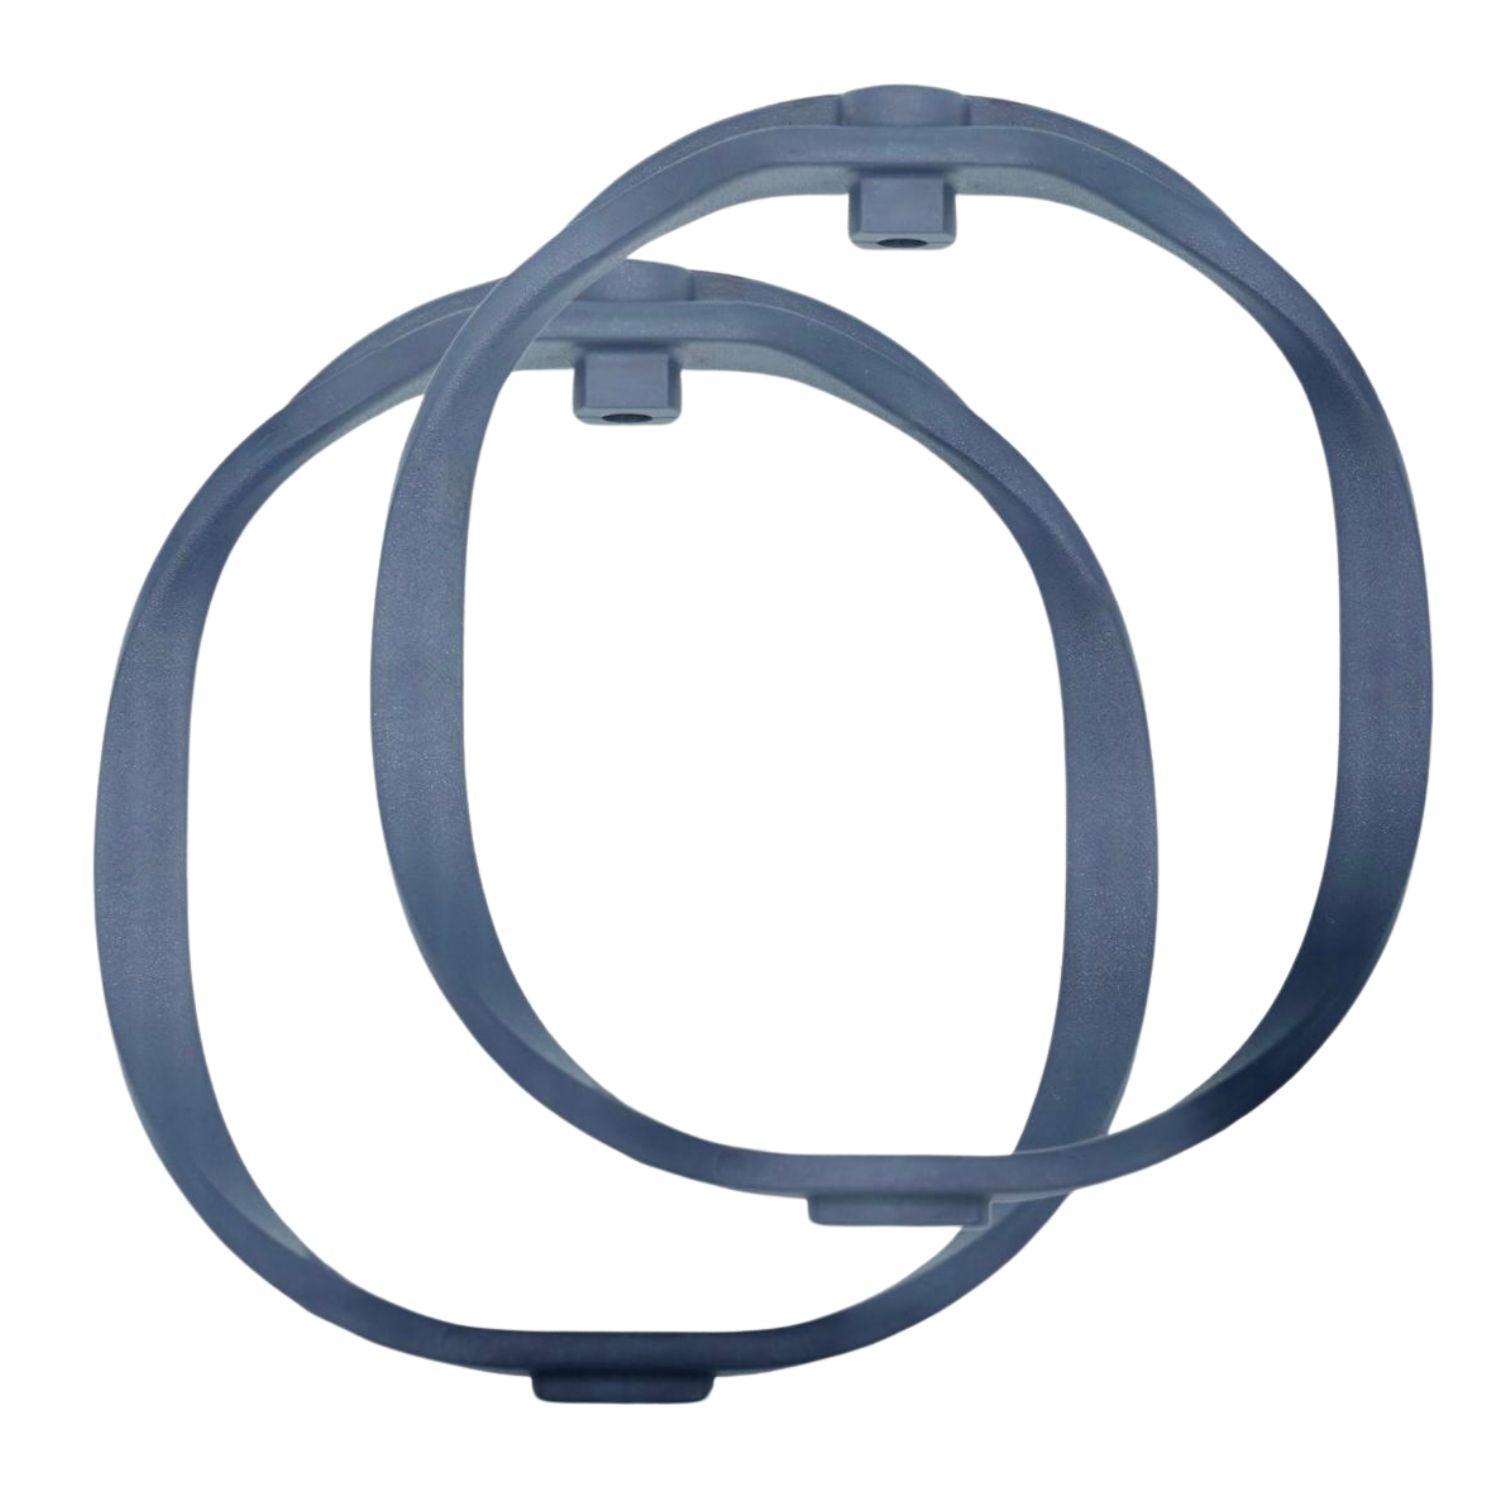 Pair of RAD-2 Hoops, Extra Firm 82-Shore (Dark Blue - Hoops Only)